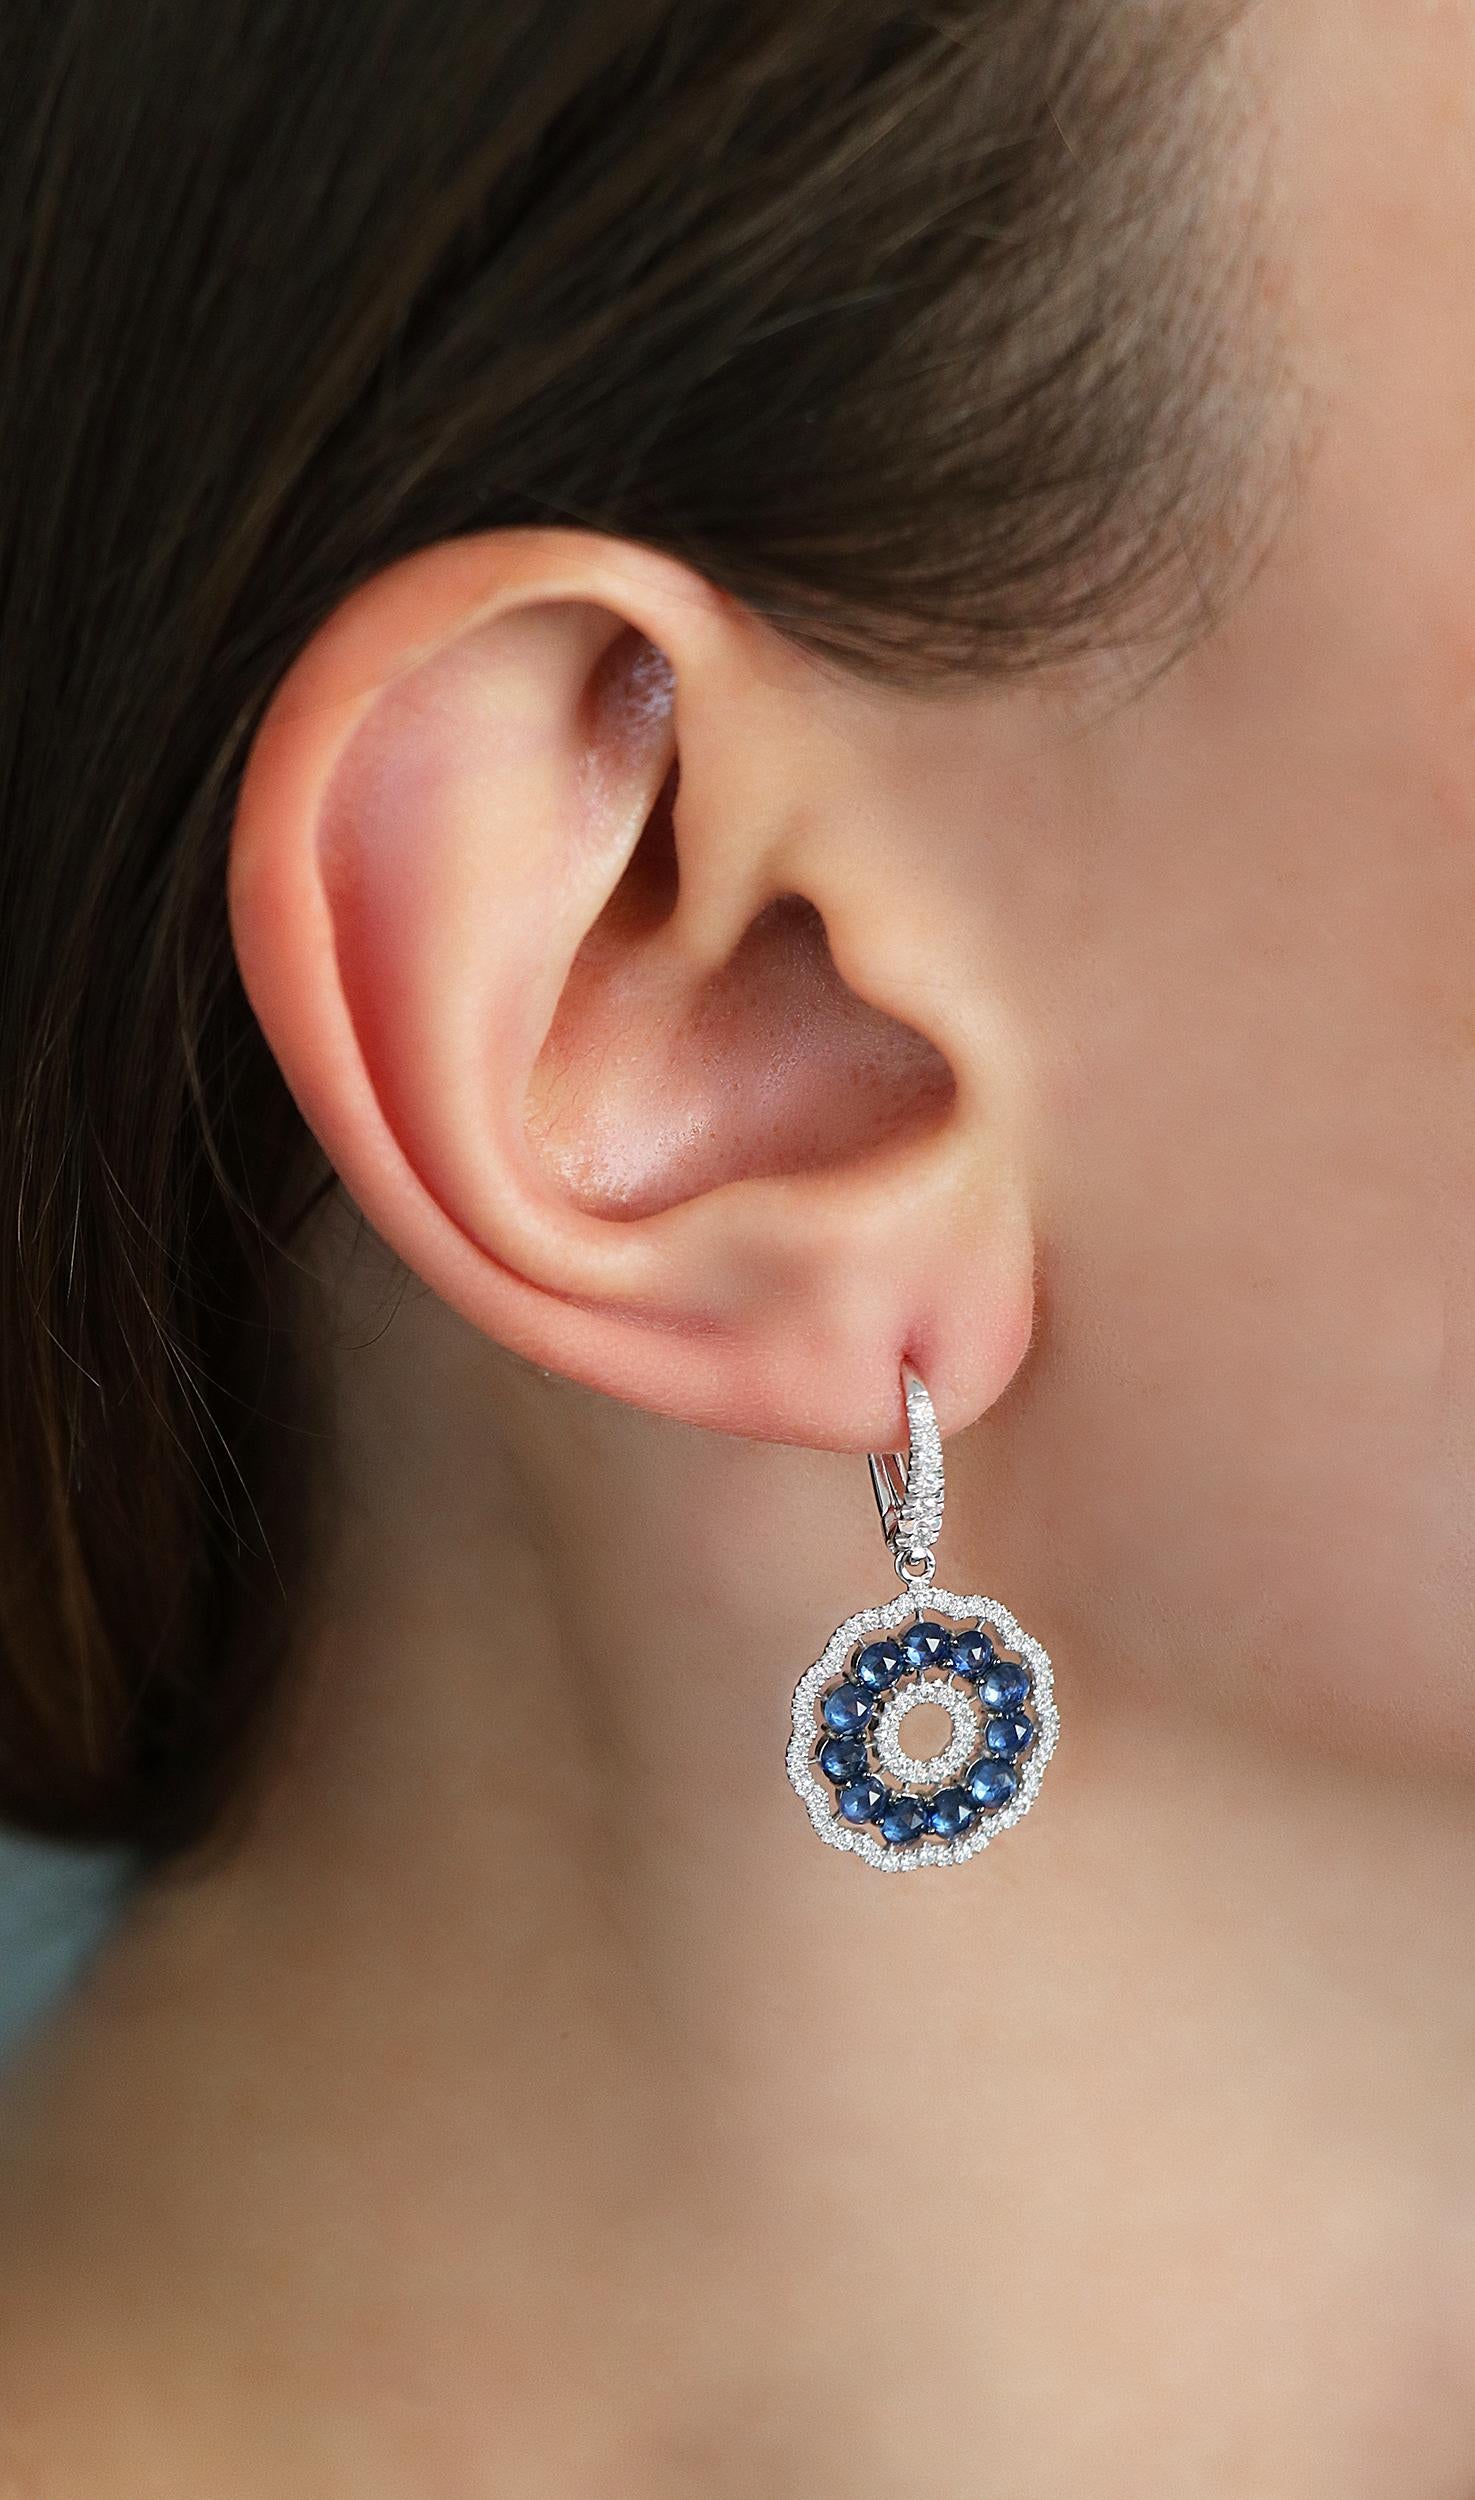 0.76 White GVS Diamonds 3.01 Rose Cut Blue Sapphires 18kt Gold Dangle Earrings In New Condition For Sale In Valenza, IT